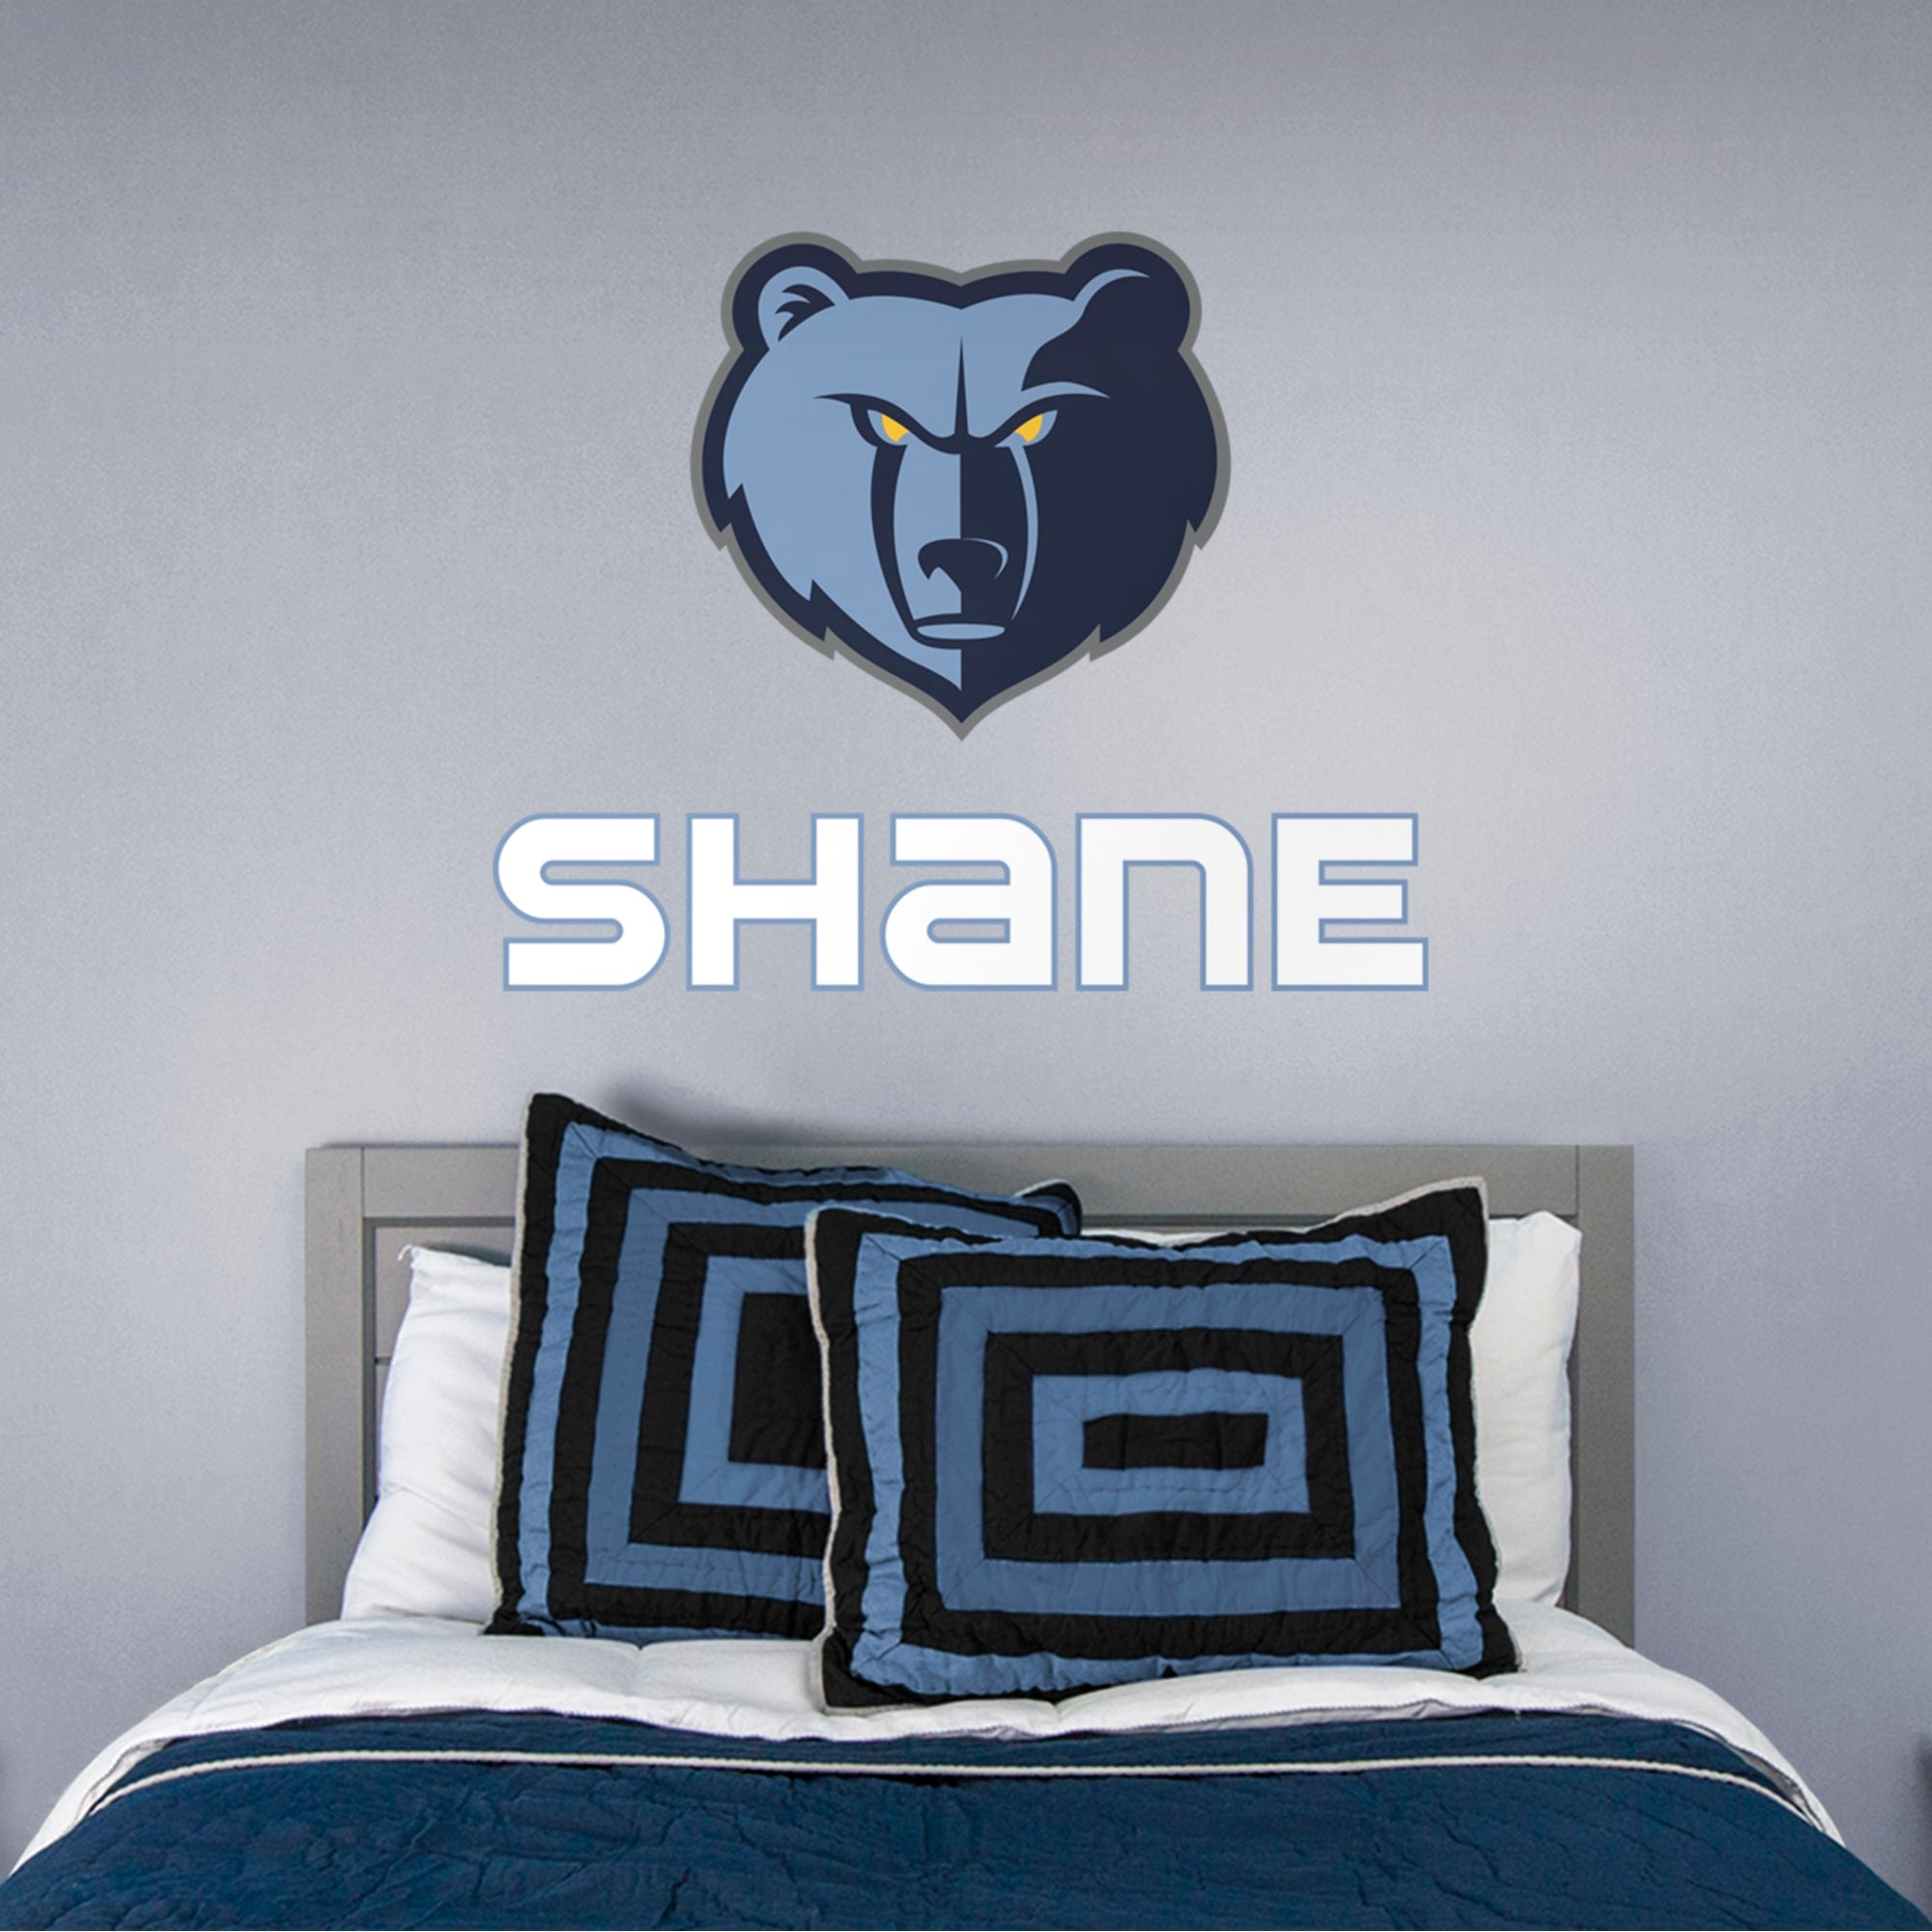 Memphis Grizzlies: Stacked Personalized Name - Officially Licensed NBA Transfer Decal in White (52"W x 39.5"H) by Fathead | Viny